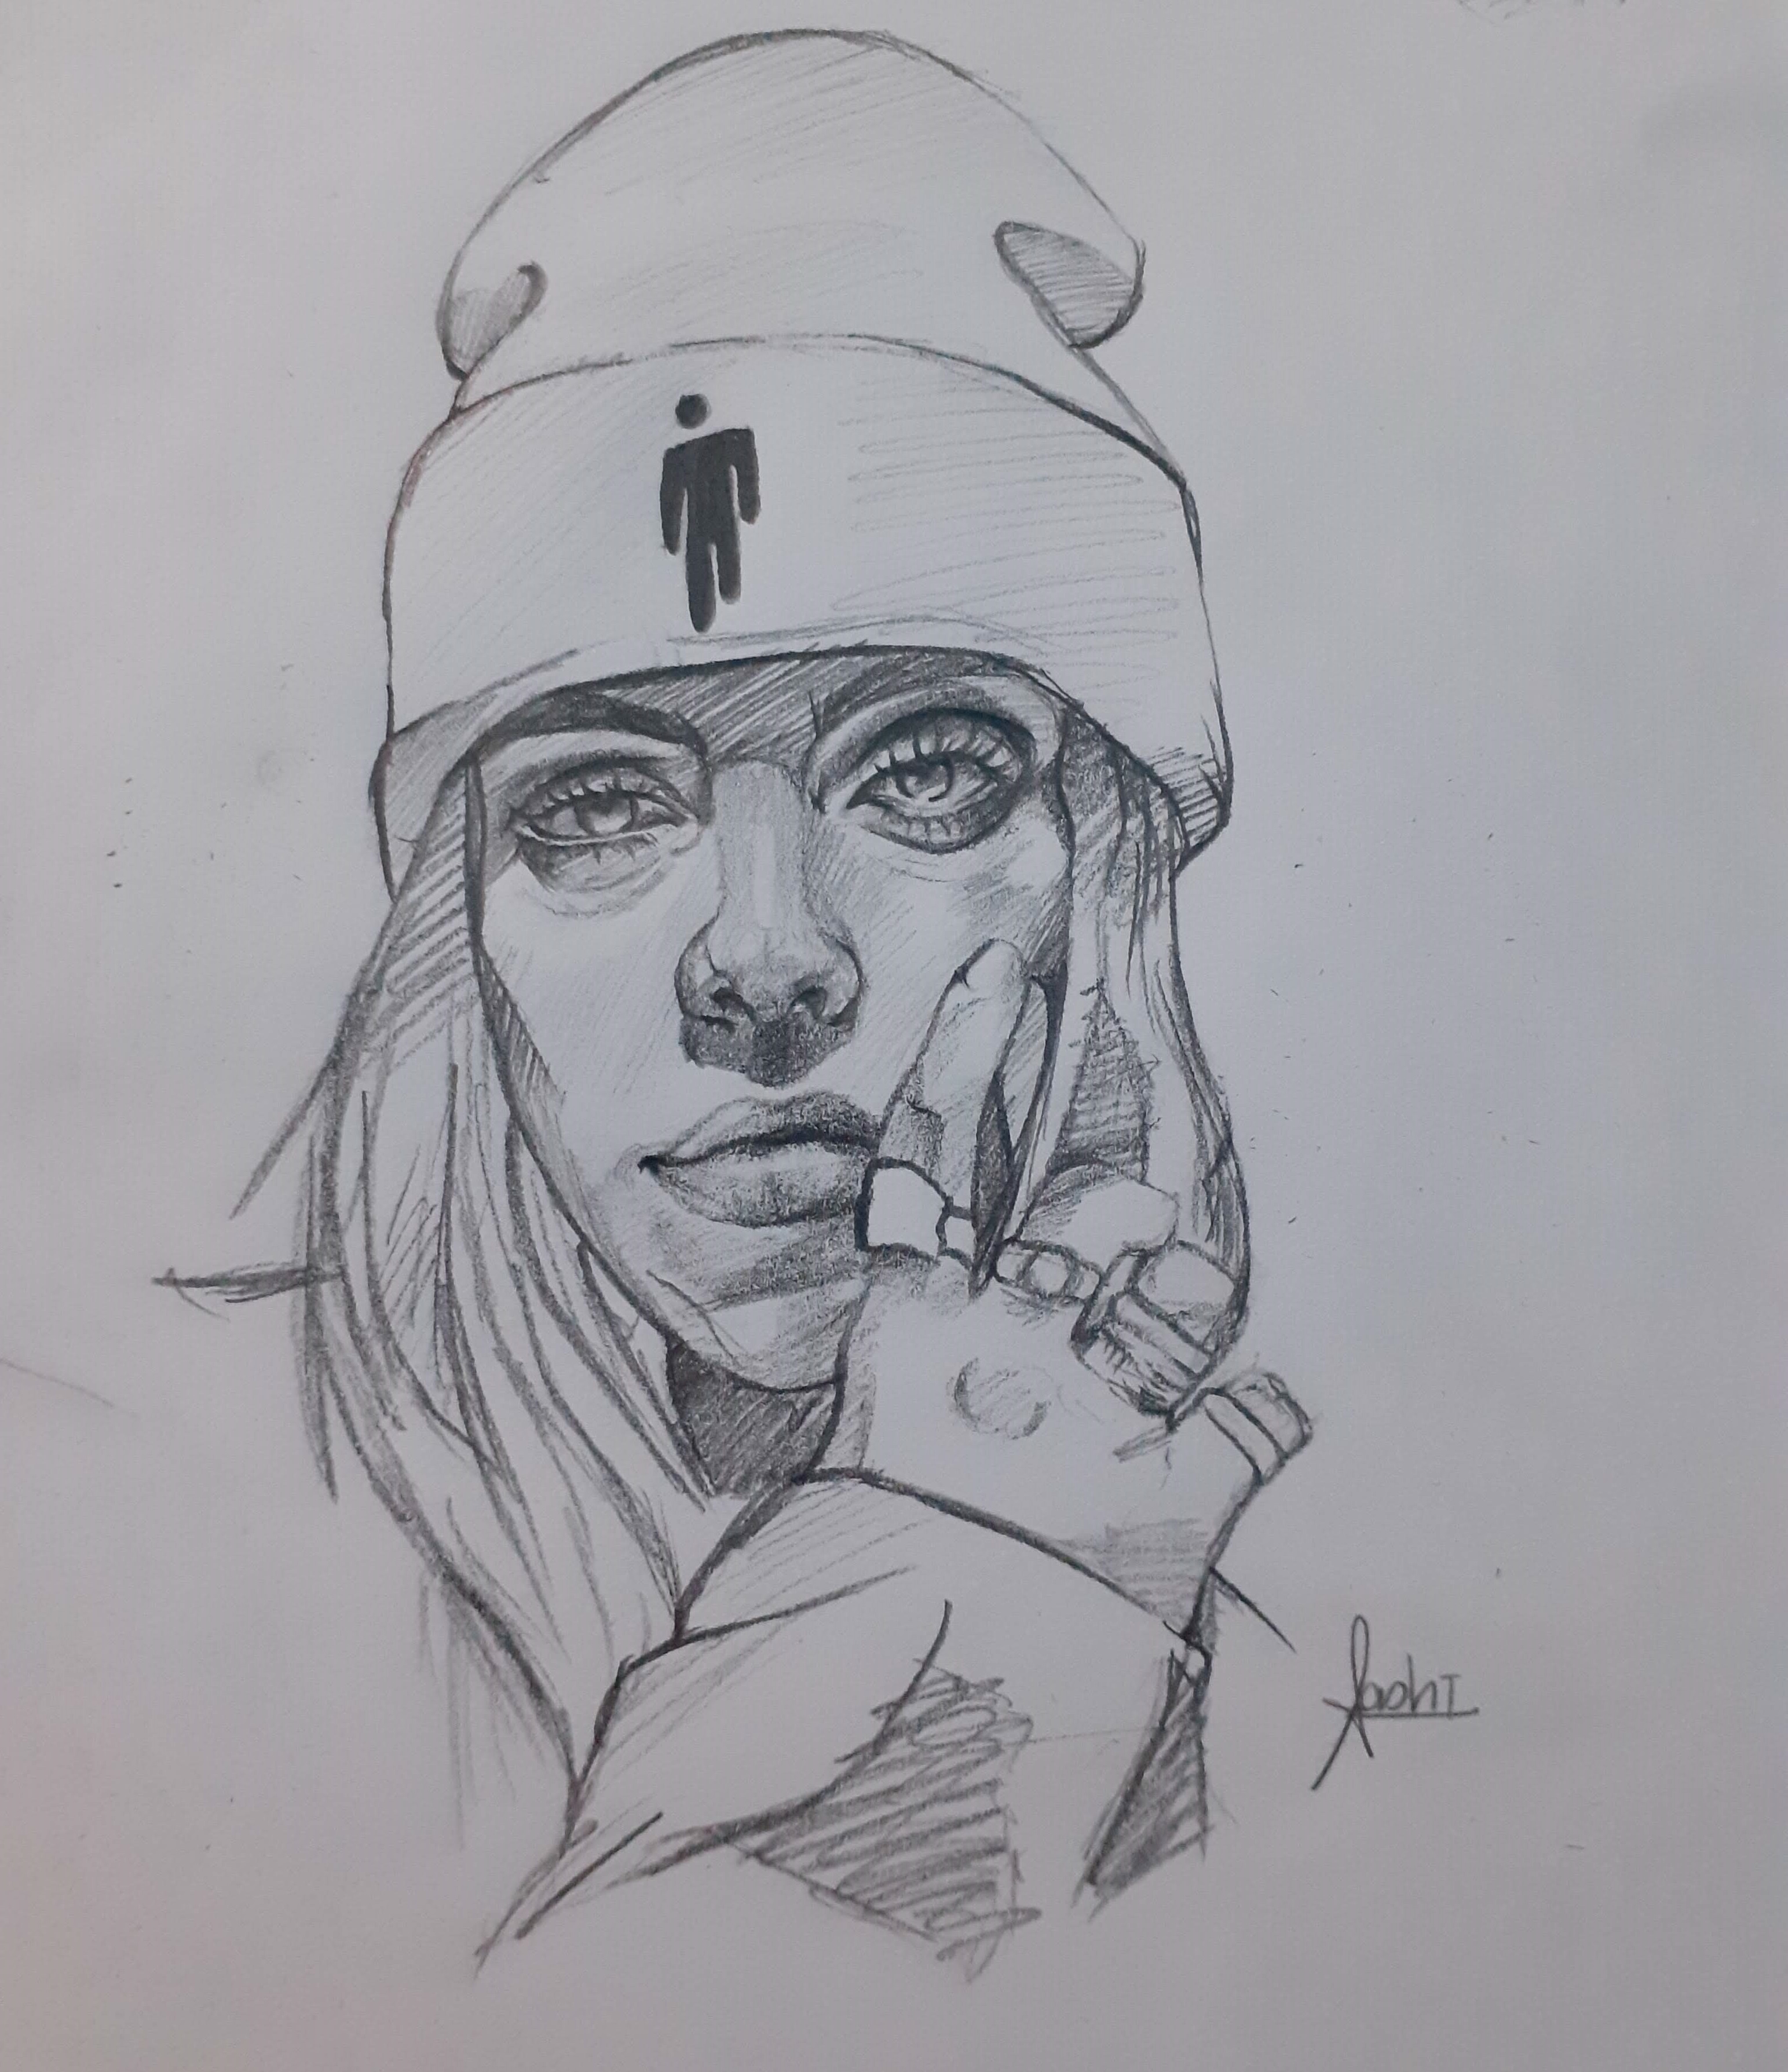 Who wants to see the worst Billie Eilish drawing   rbillieeilish